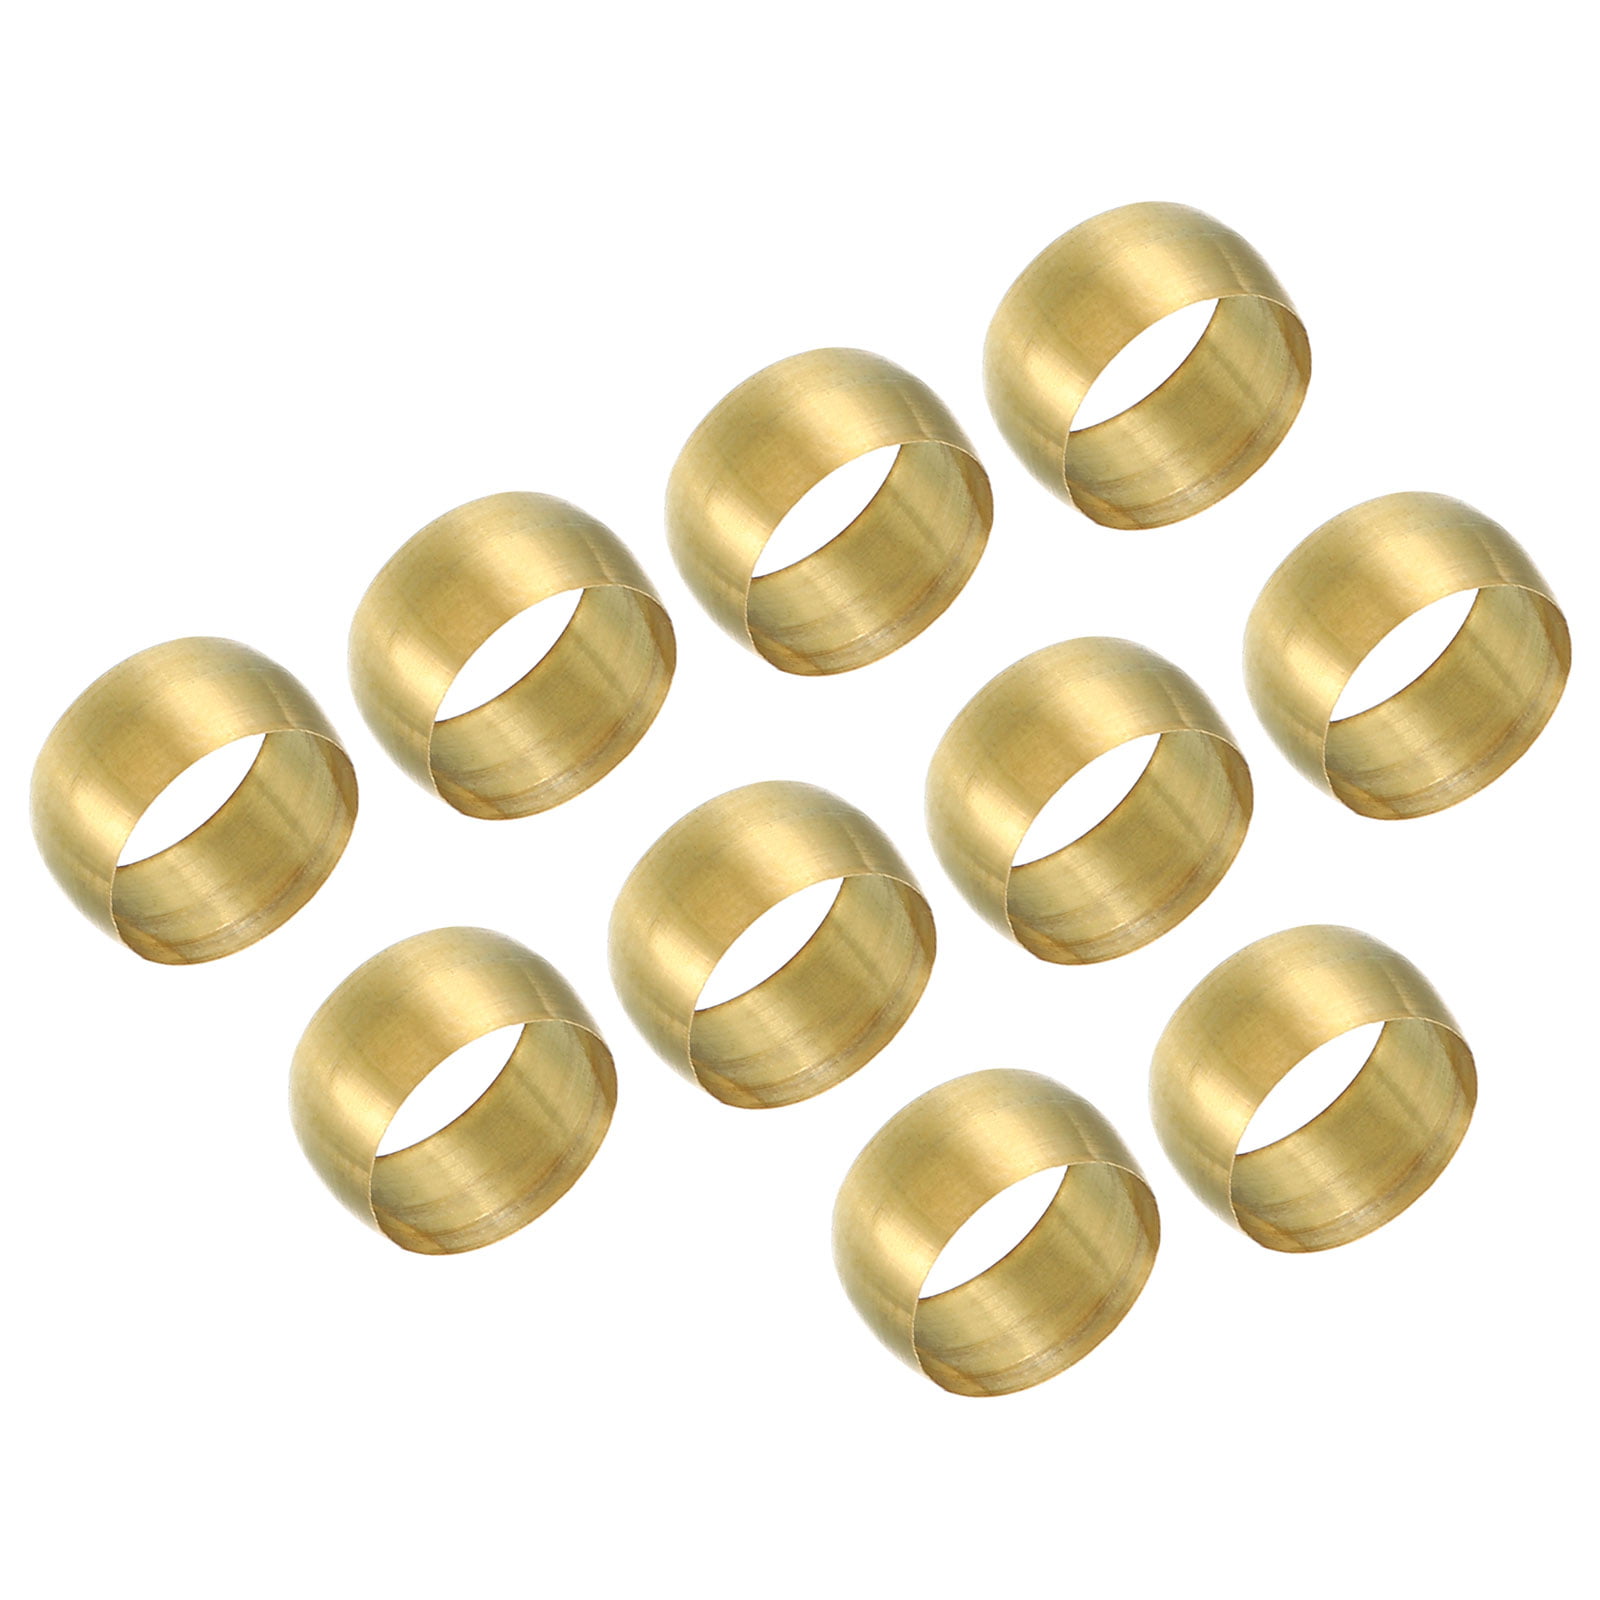 Uxcell 10mm Tube OD Brass Compression Sleeves Ferrules Brass